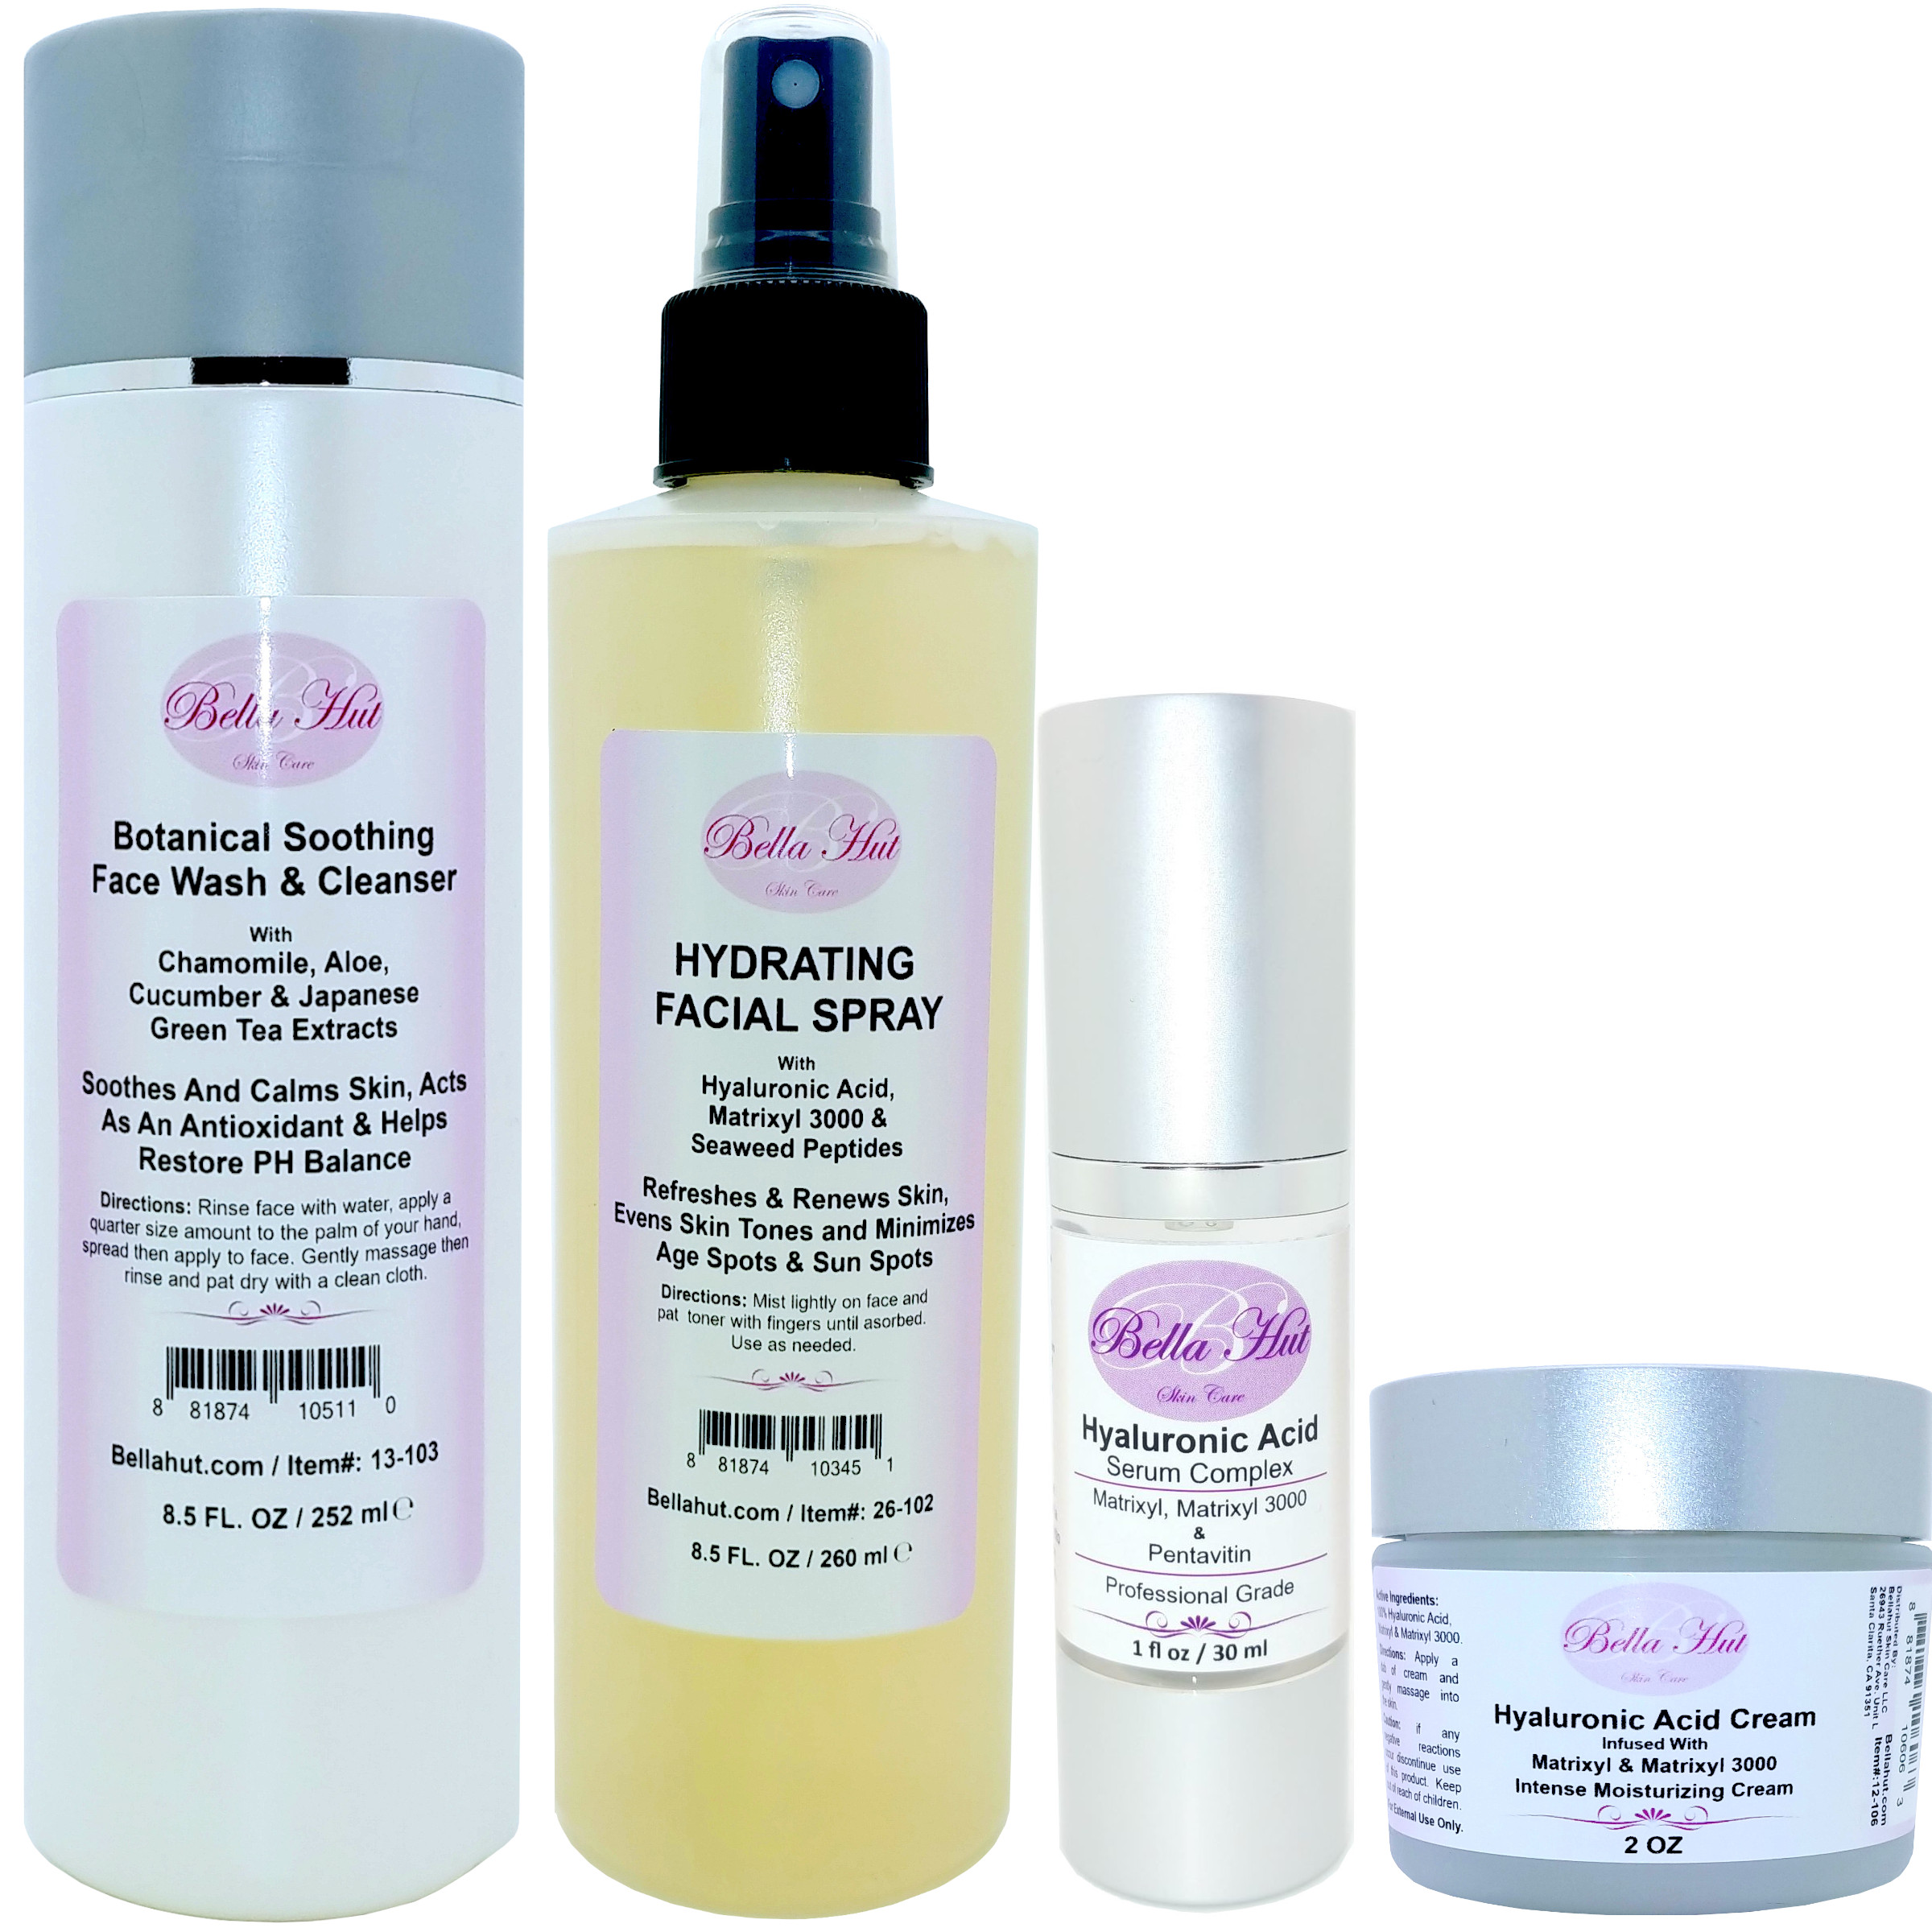 A complete and comprehensive kit for treating dry skin conditions.